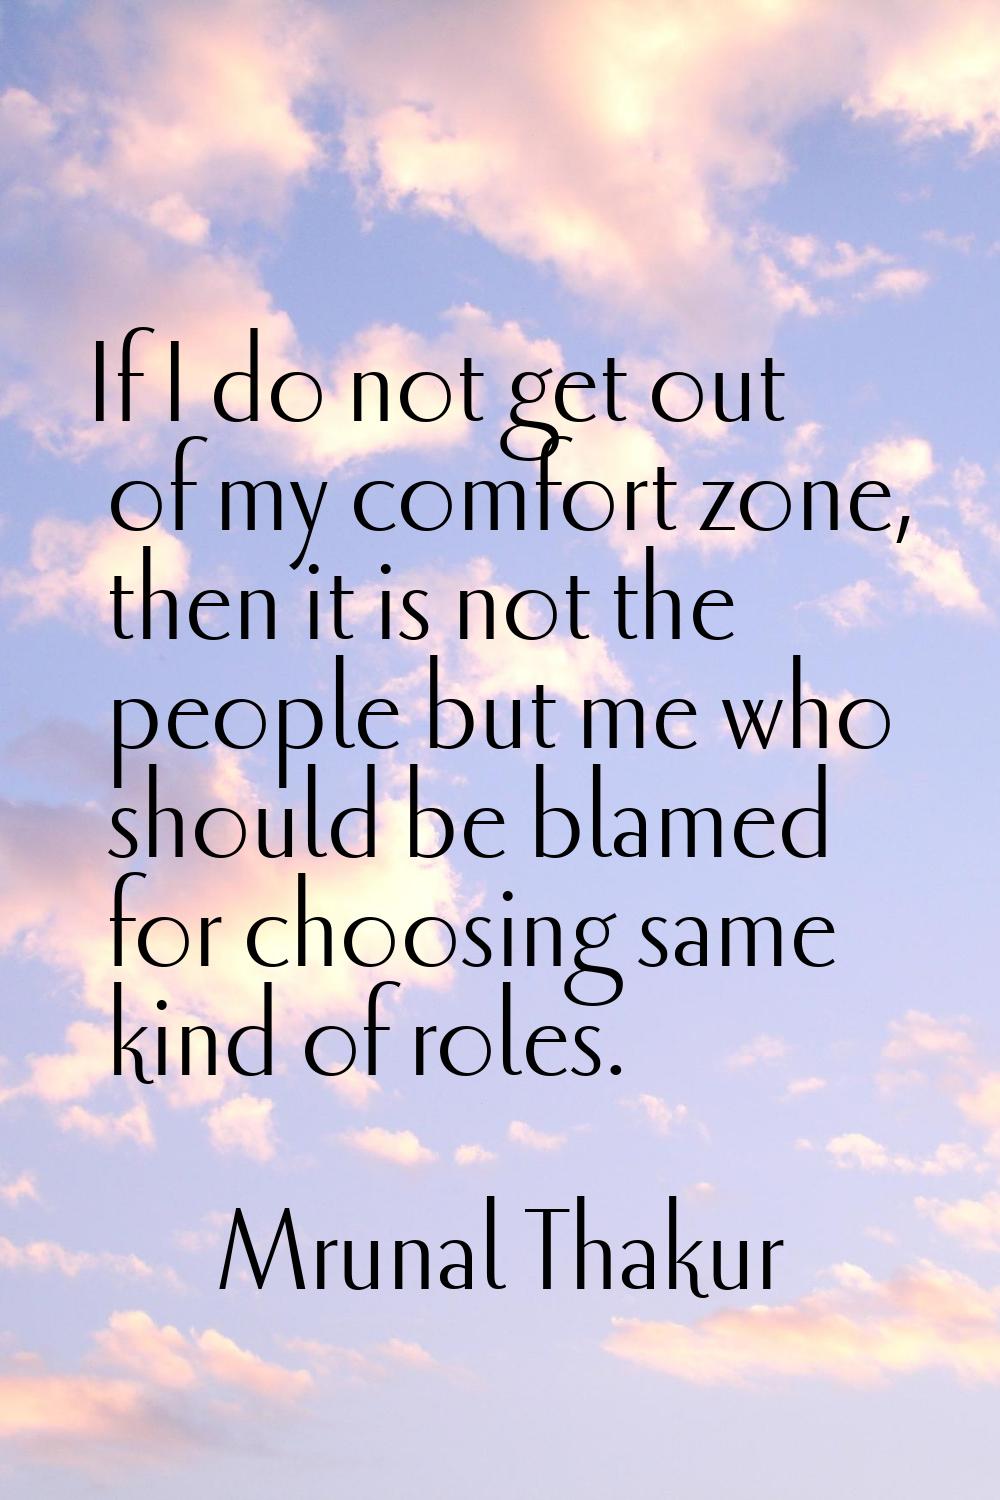 If I do not get out of my comfort zone, then it is not the people but me who should be blamed for c